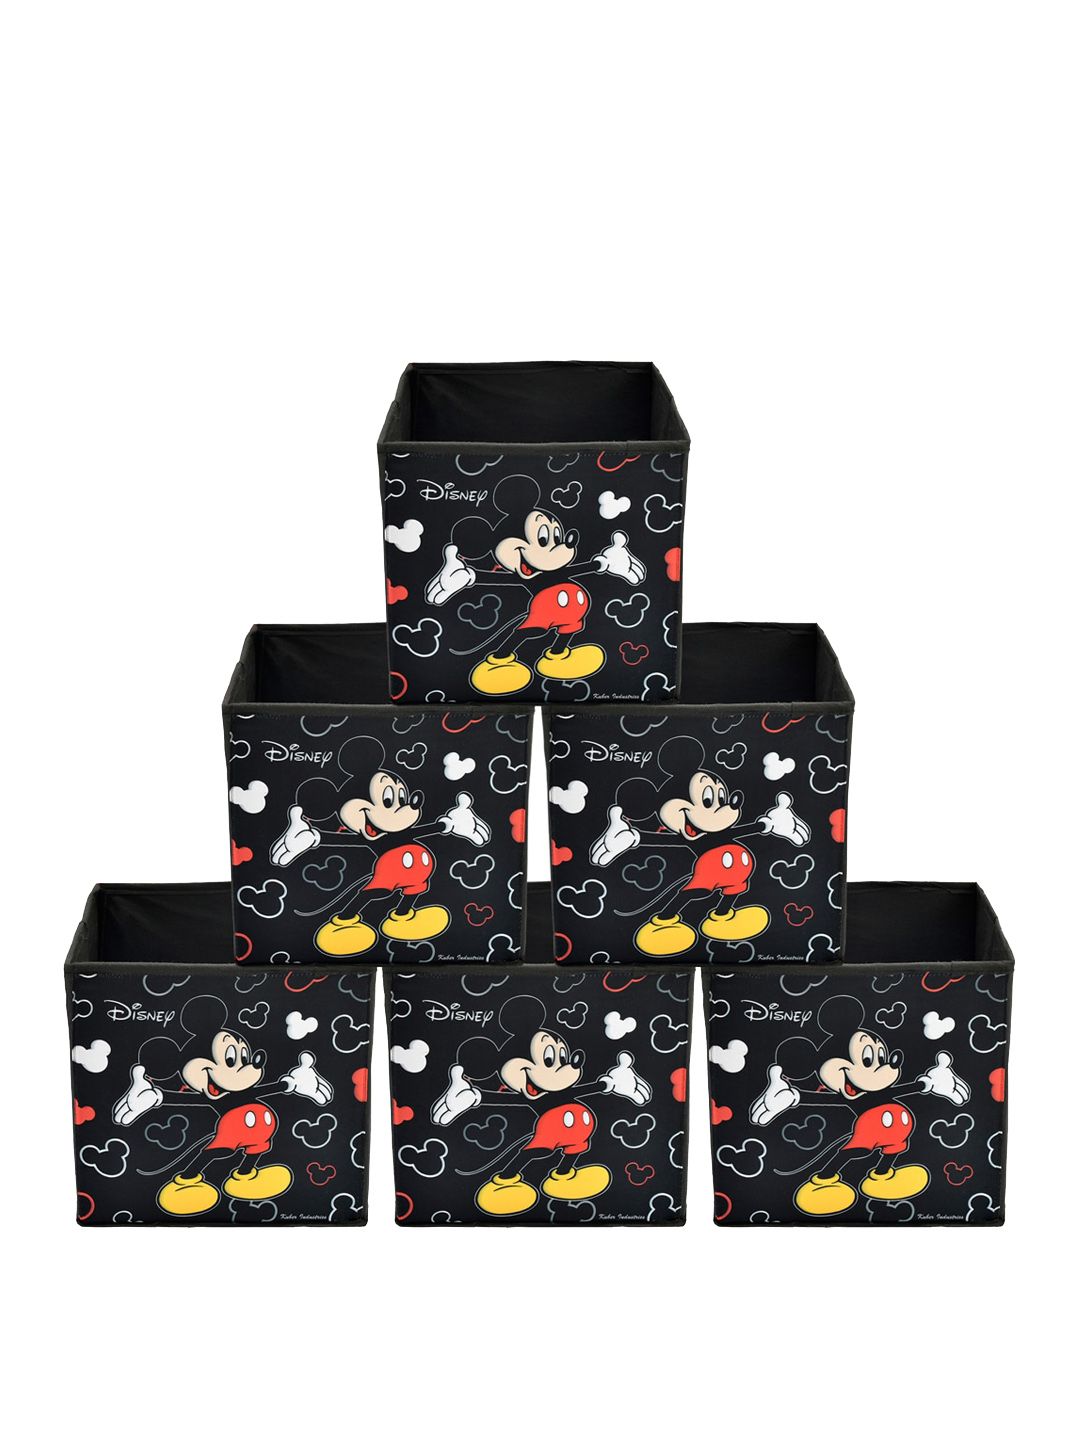 Kuber Industries Set Of 6 Black Disney Mickey Mouse Printed Foldable Storage Boxes Price in India